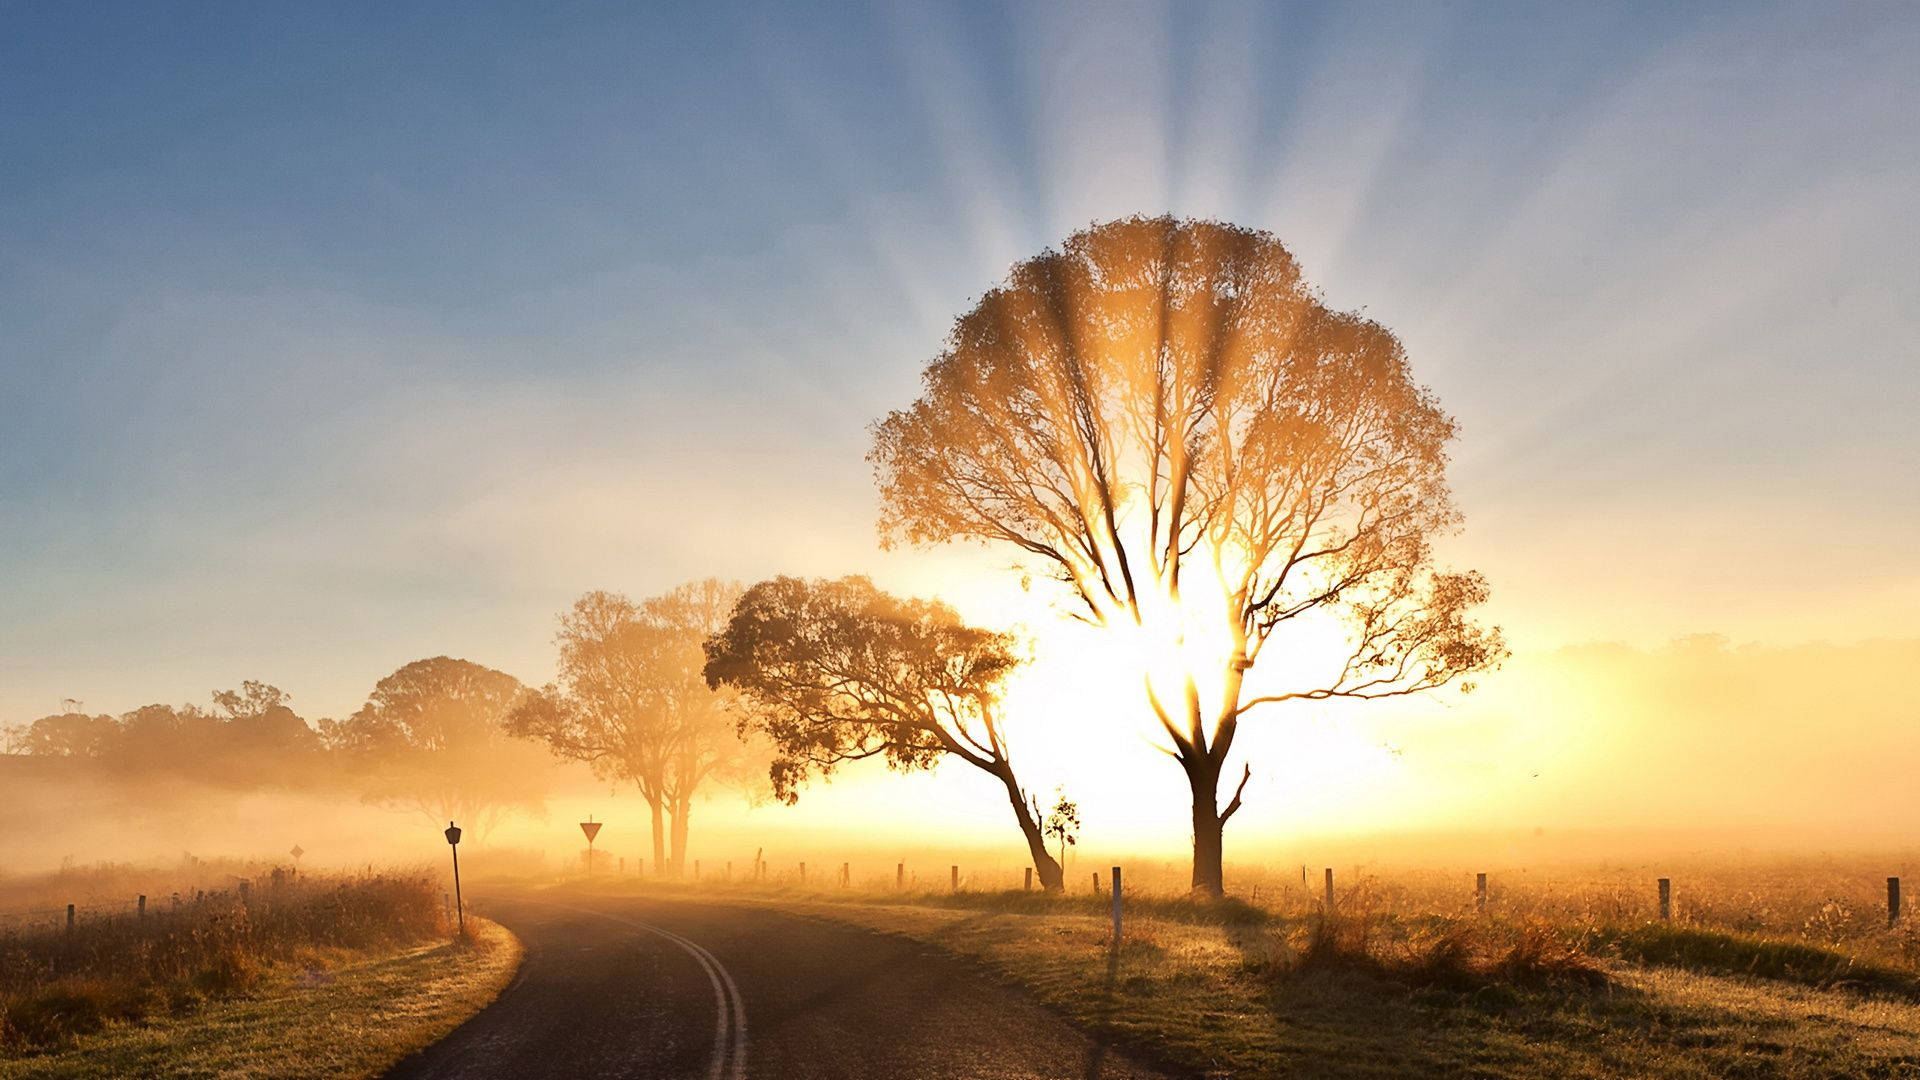 Look on in wonder at this tranquil sunrise Wallpaper